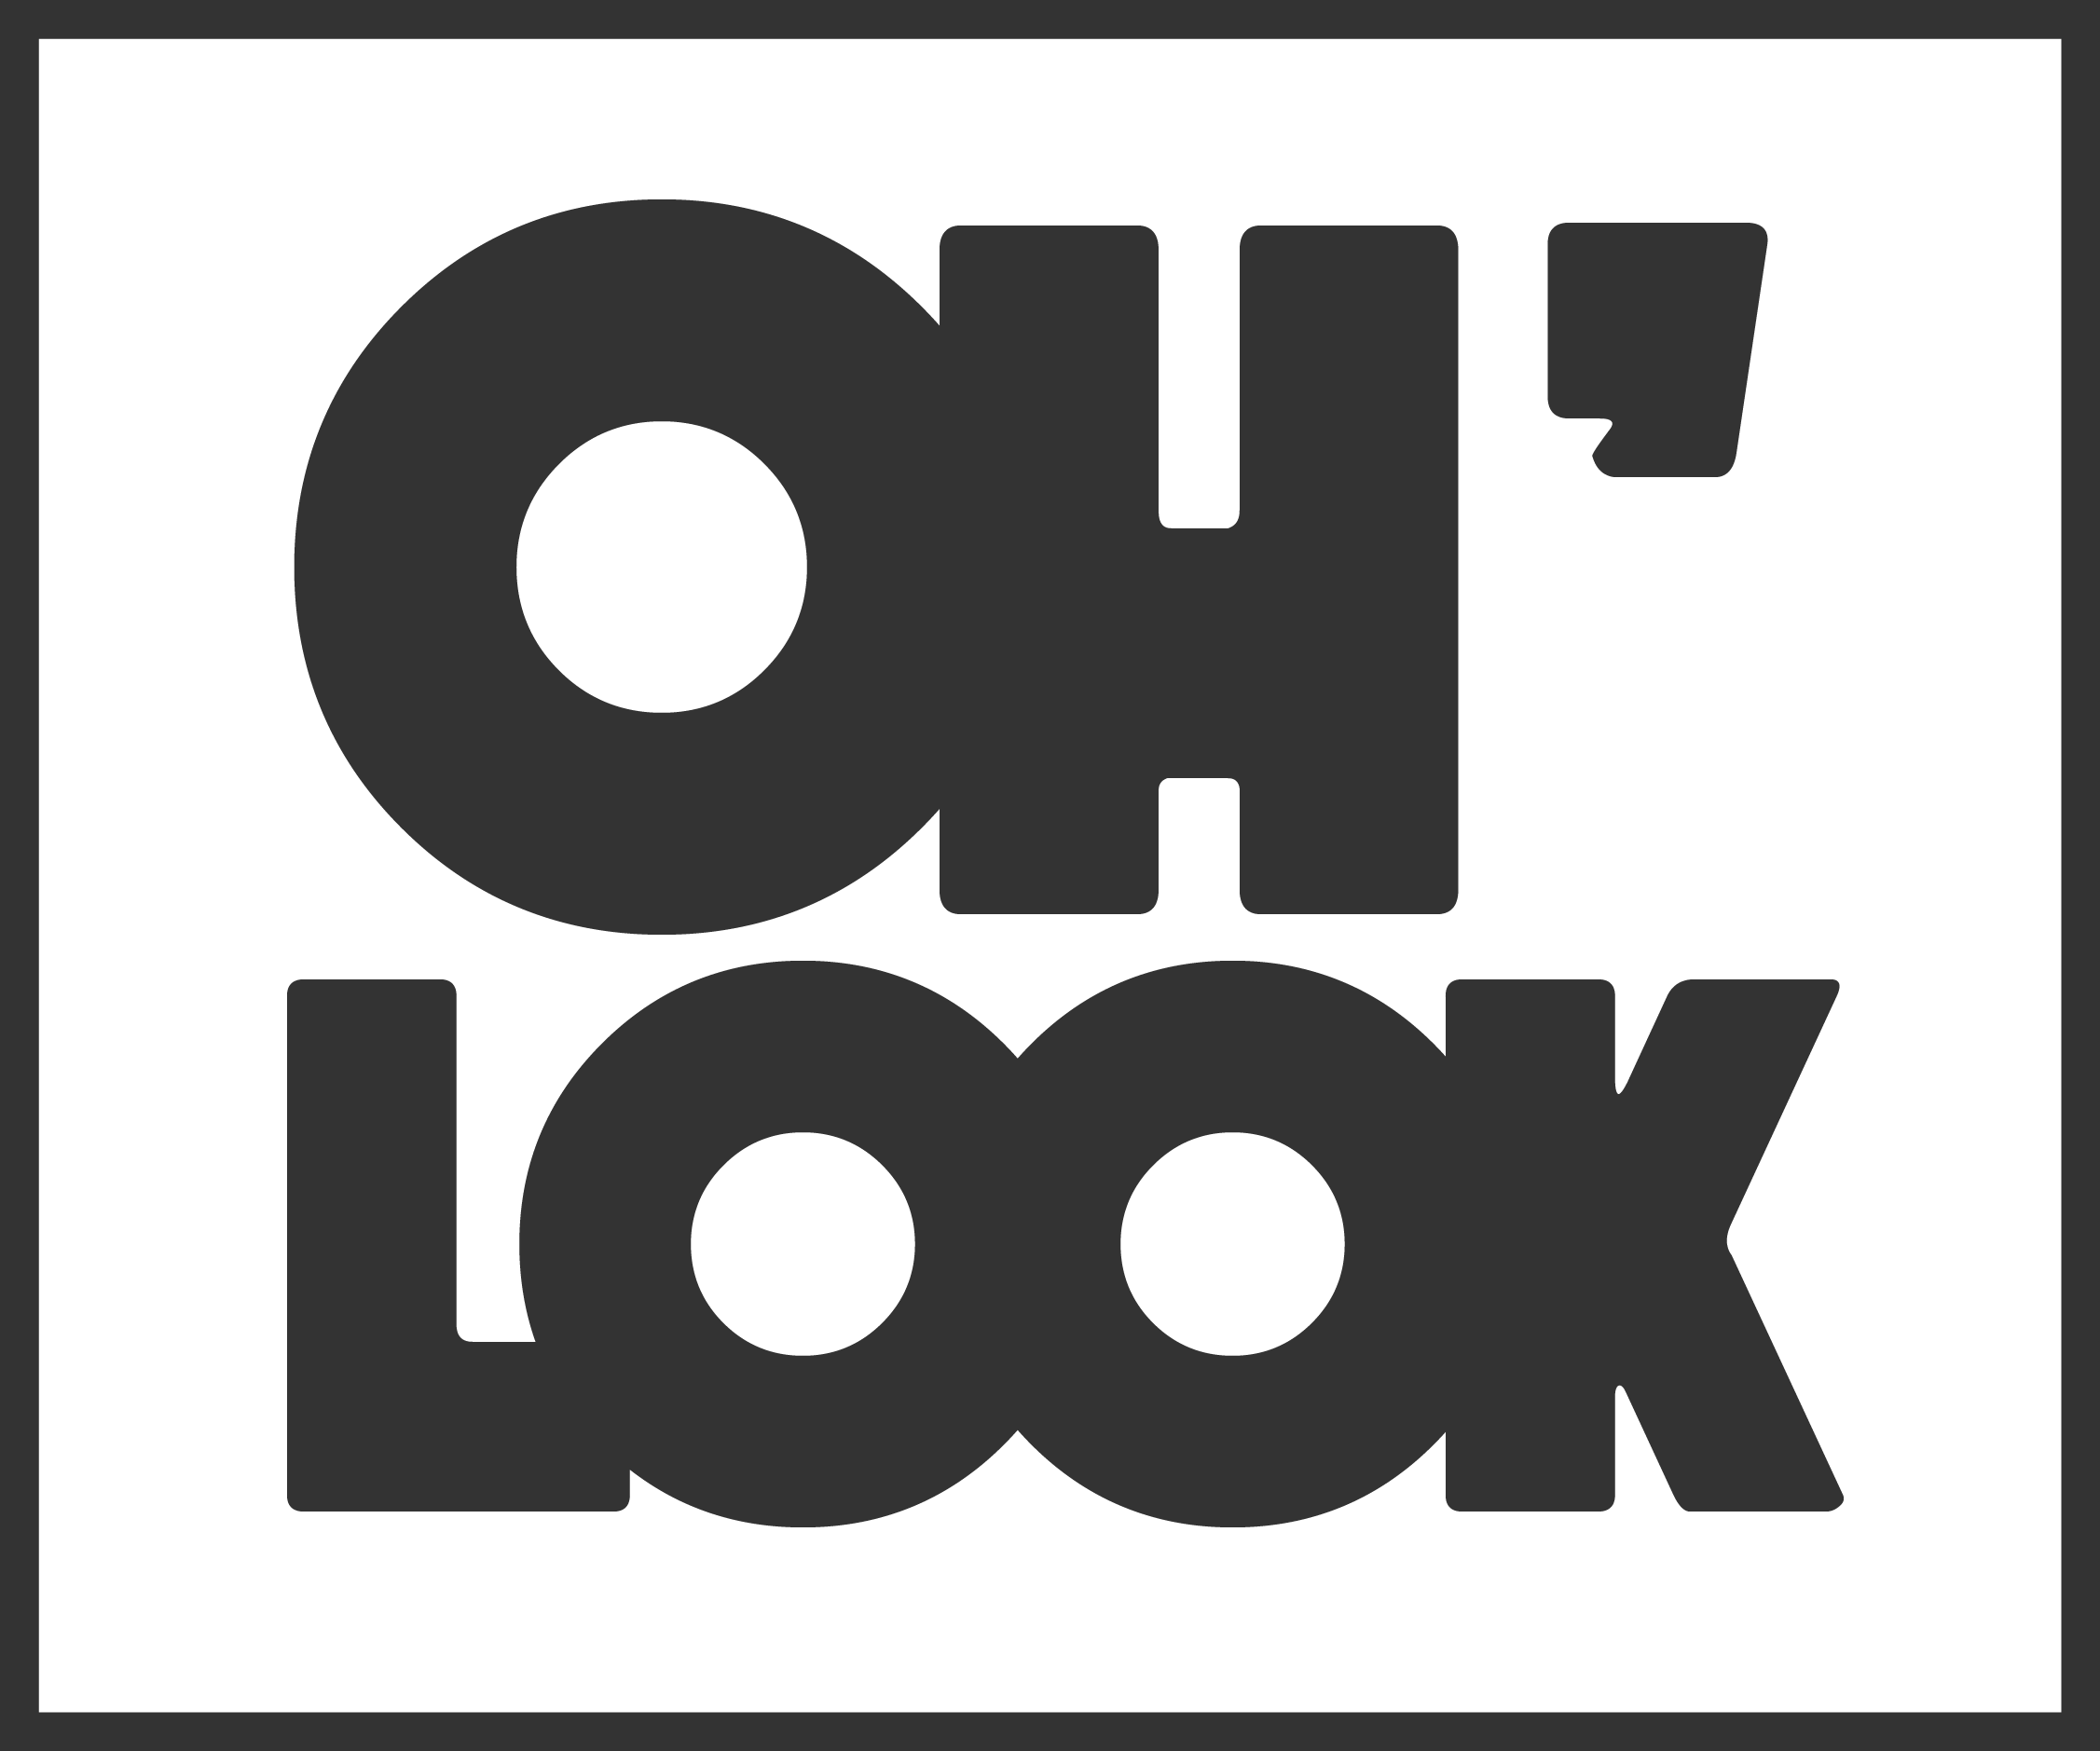 Ohlook - Oh Look (2253x1879)